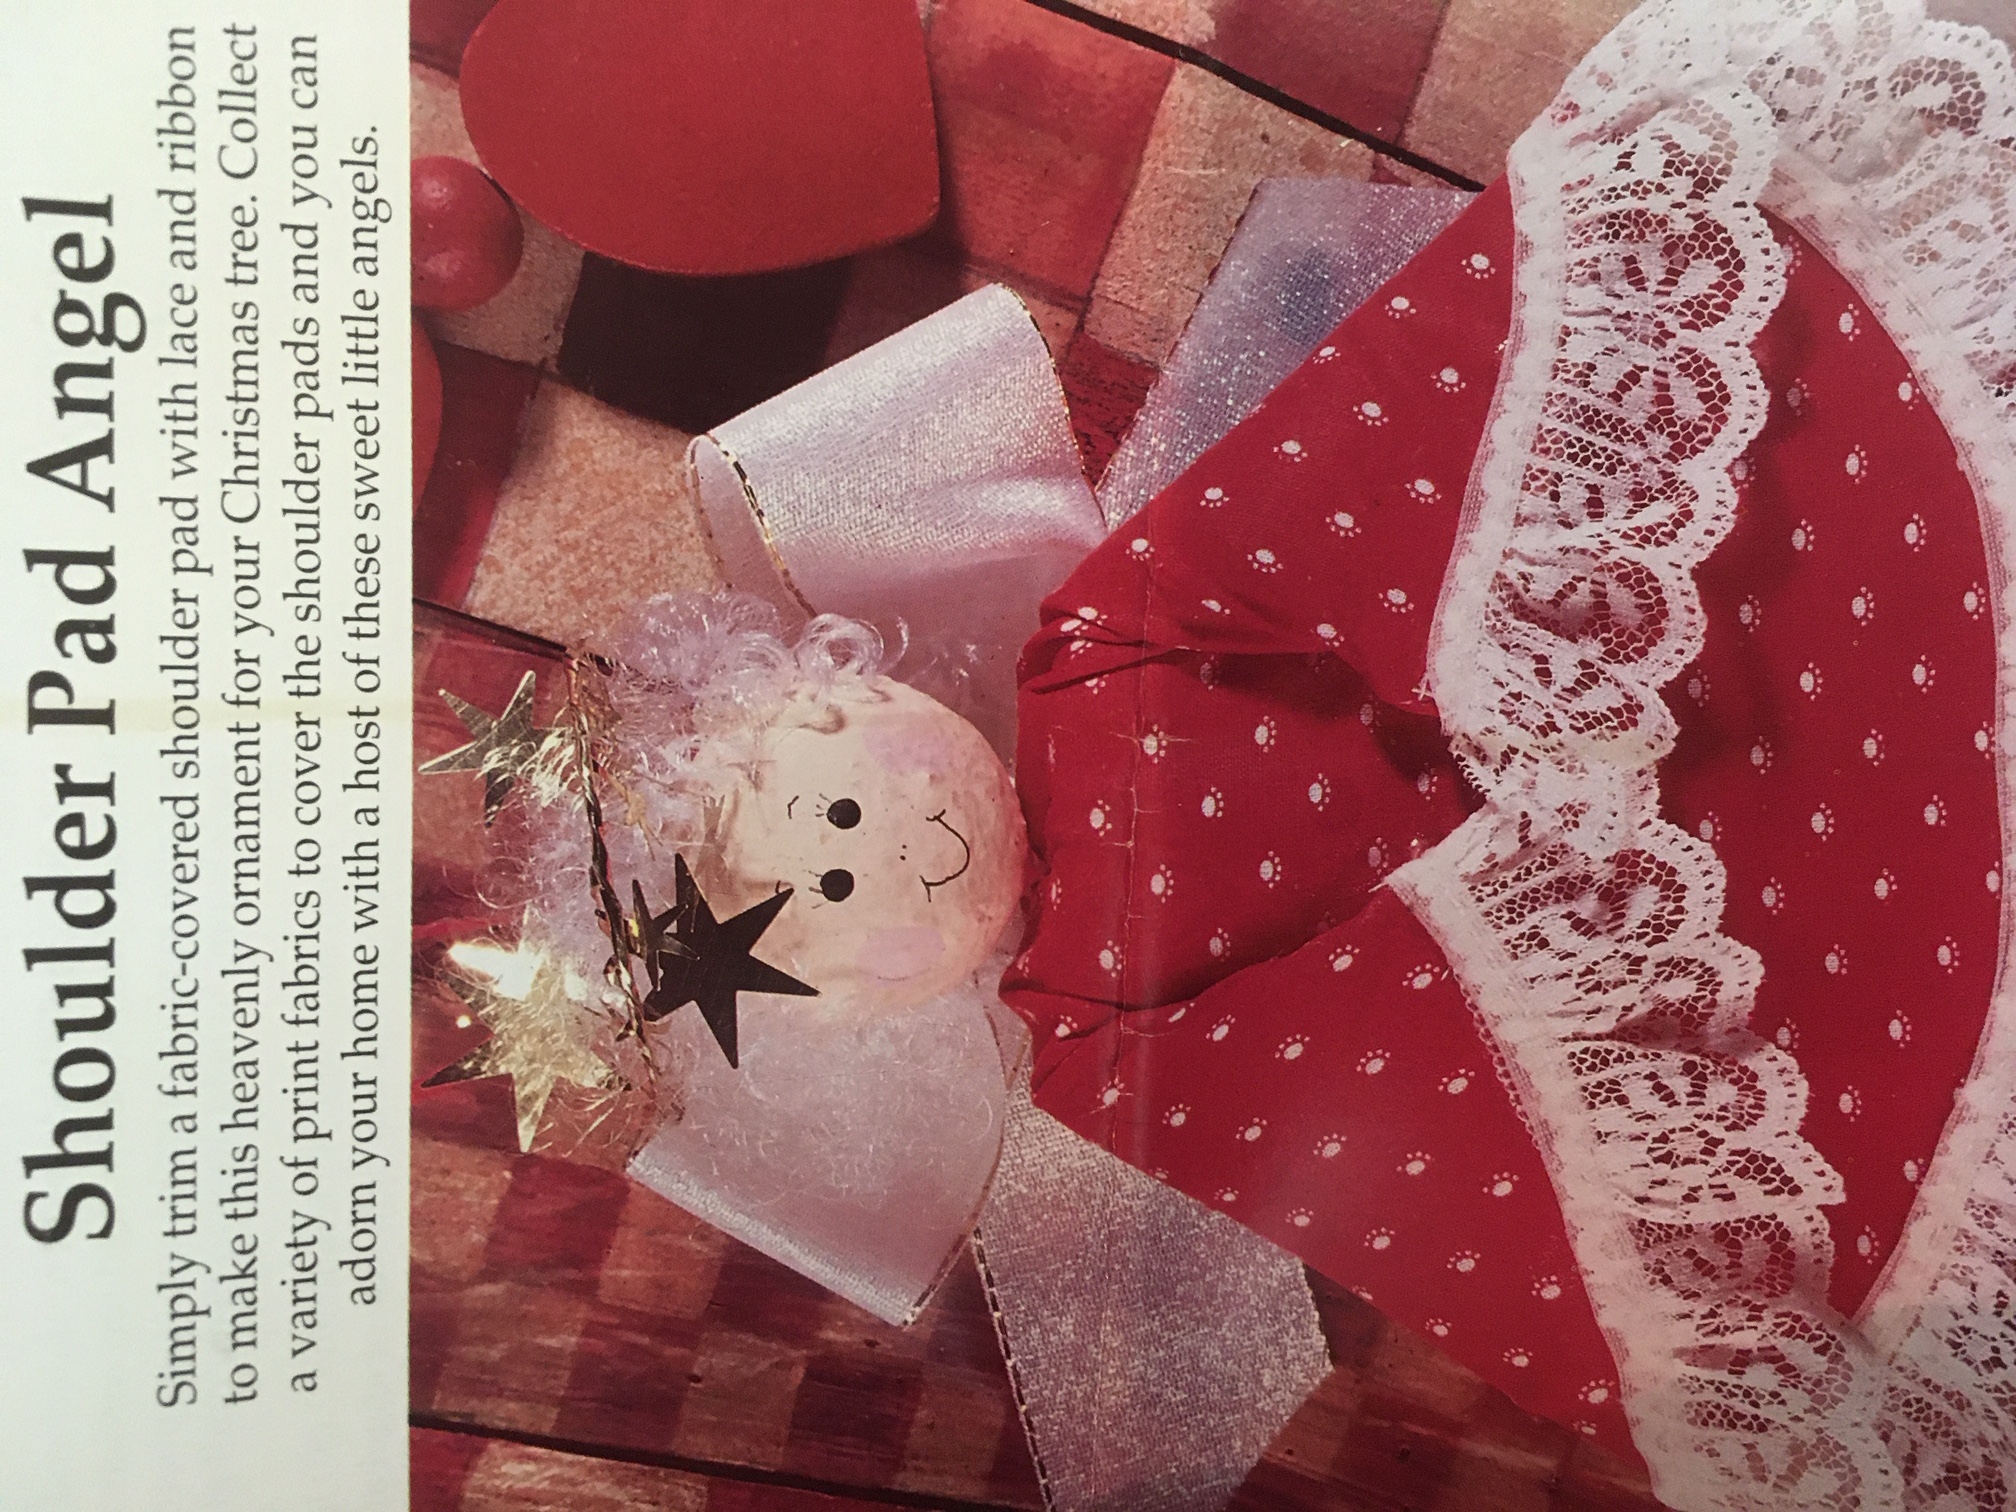 color atlas of pathophysiology - Shoulder Pad Angel Simply trim a fabriccovered shoulder pad with lace and ribbon to make this heavenly ornament for your Christmas tree. Collect a variety of print fabrics to cover the shoulder pads and you can adorn your 